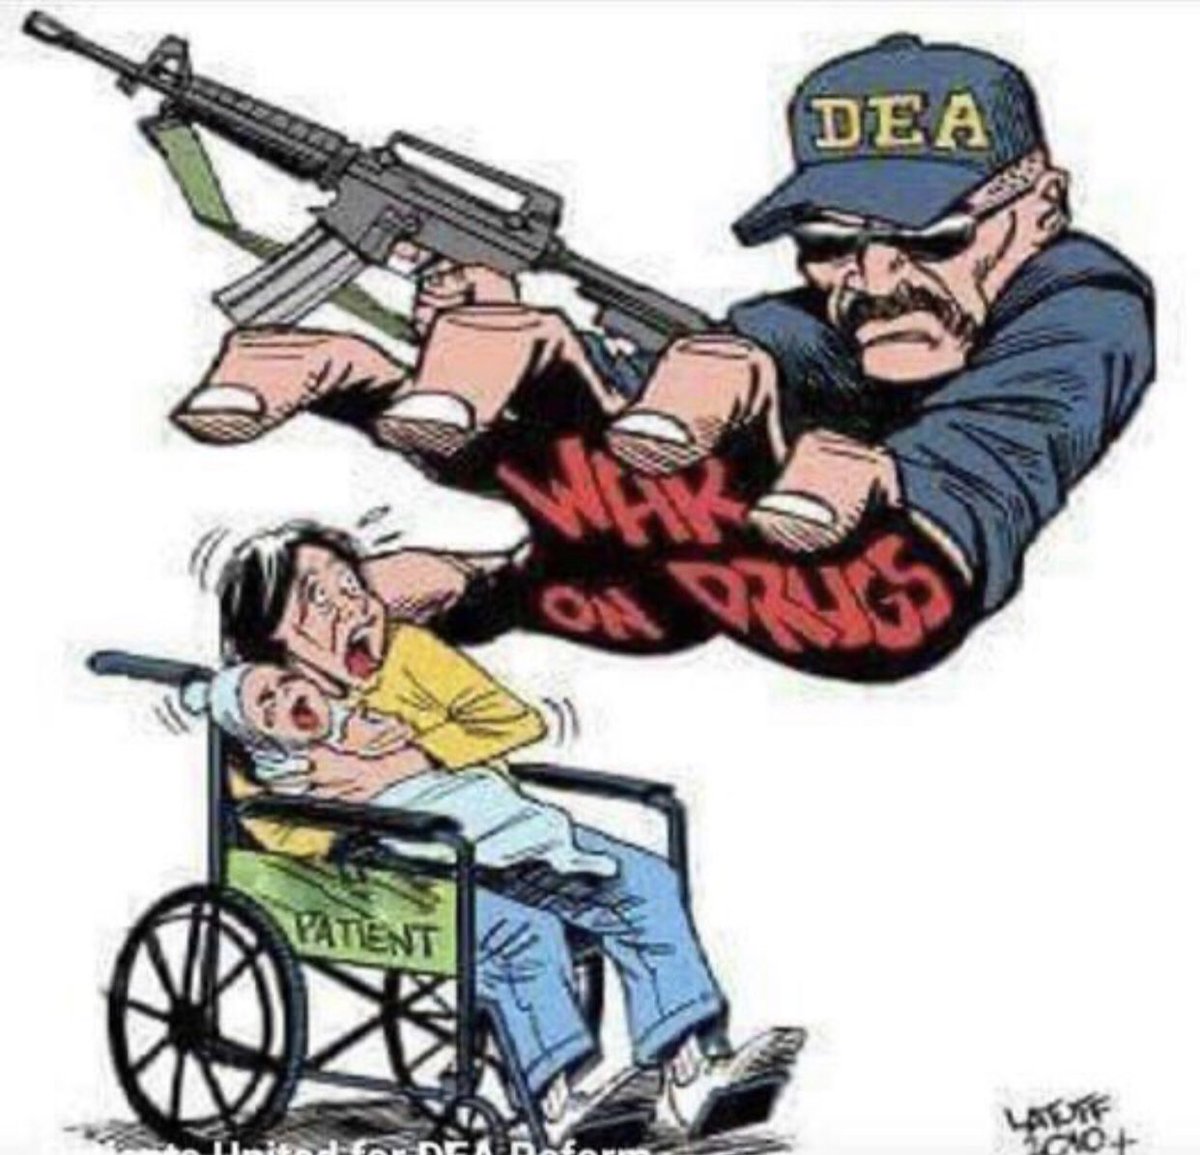 @Donseyesareopen Thank you for caring. This is now the norm in the USA. We’re the most hated country on earth, for good reason. Bush 41, Clinton & CIA are the REAL “opioid crisis” but disabled ppl are suffering bc of it. It has to stop. The War on Drugs PEOPLE is a trillion$ WASTE. #DefundDEA